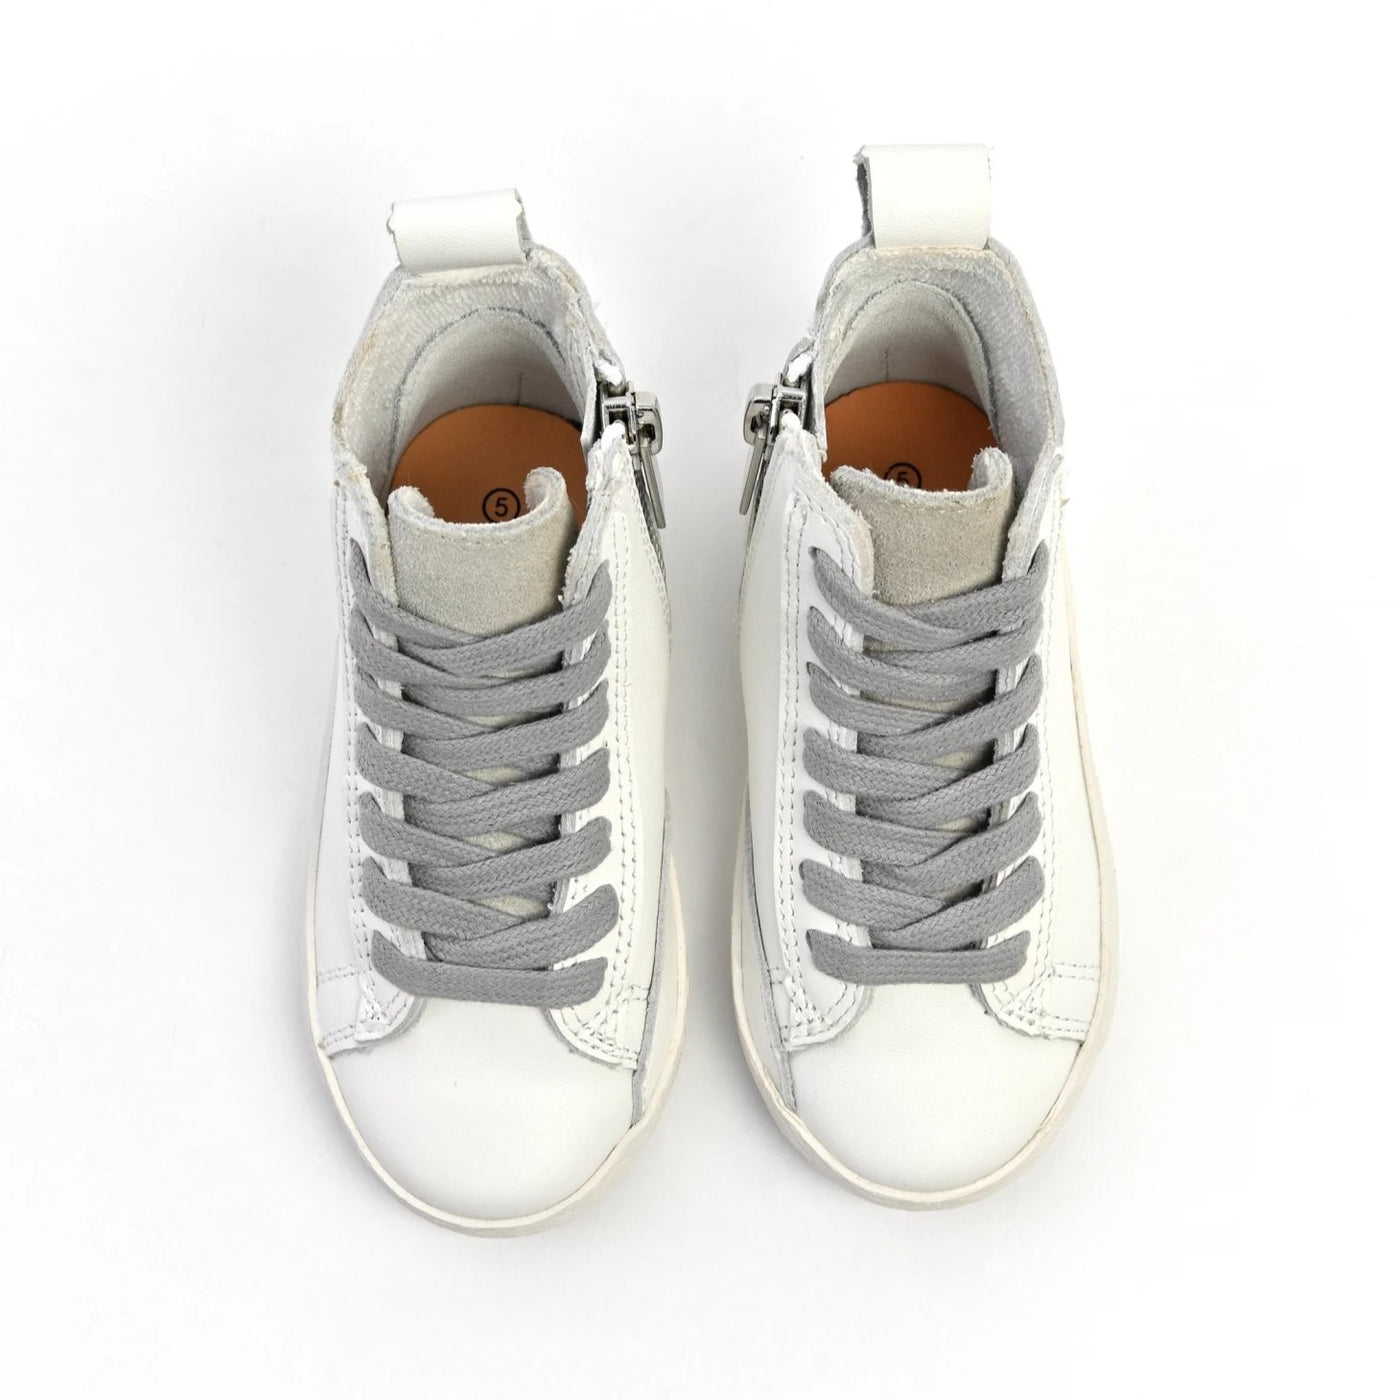 White - High Top Sneakers